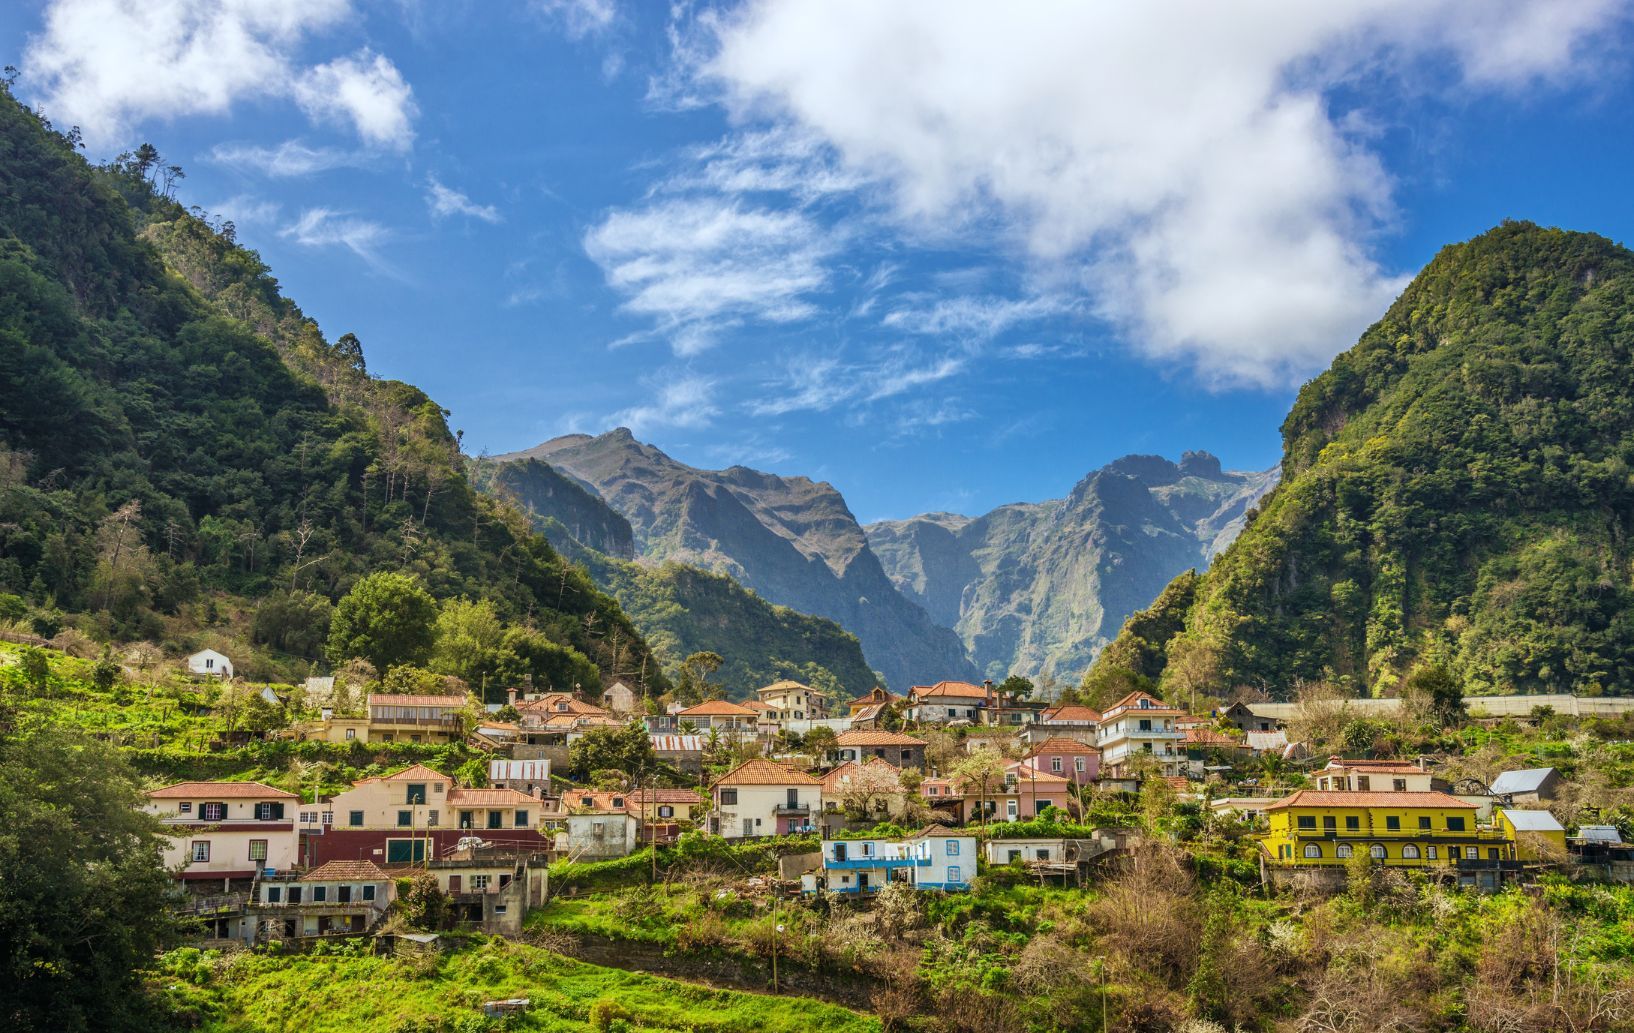 A small village in Madeira, a Portuguese island with a subtropical climate